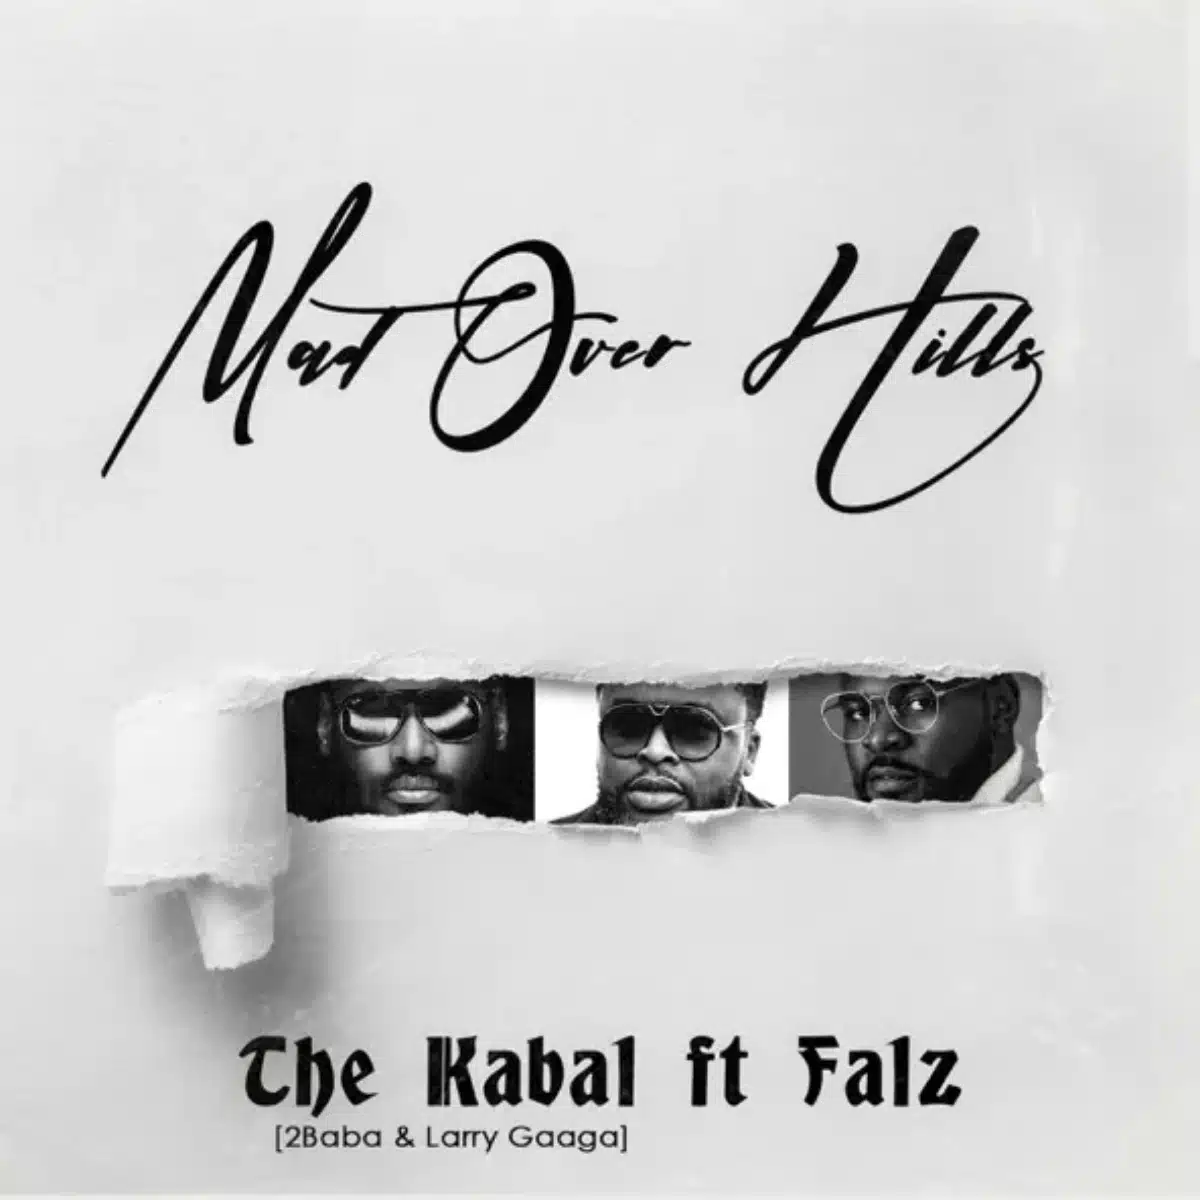 DOWNLOAD: 2Baba, Larry Gaaga & Falz – “Mad Over Hills” Mp3